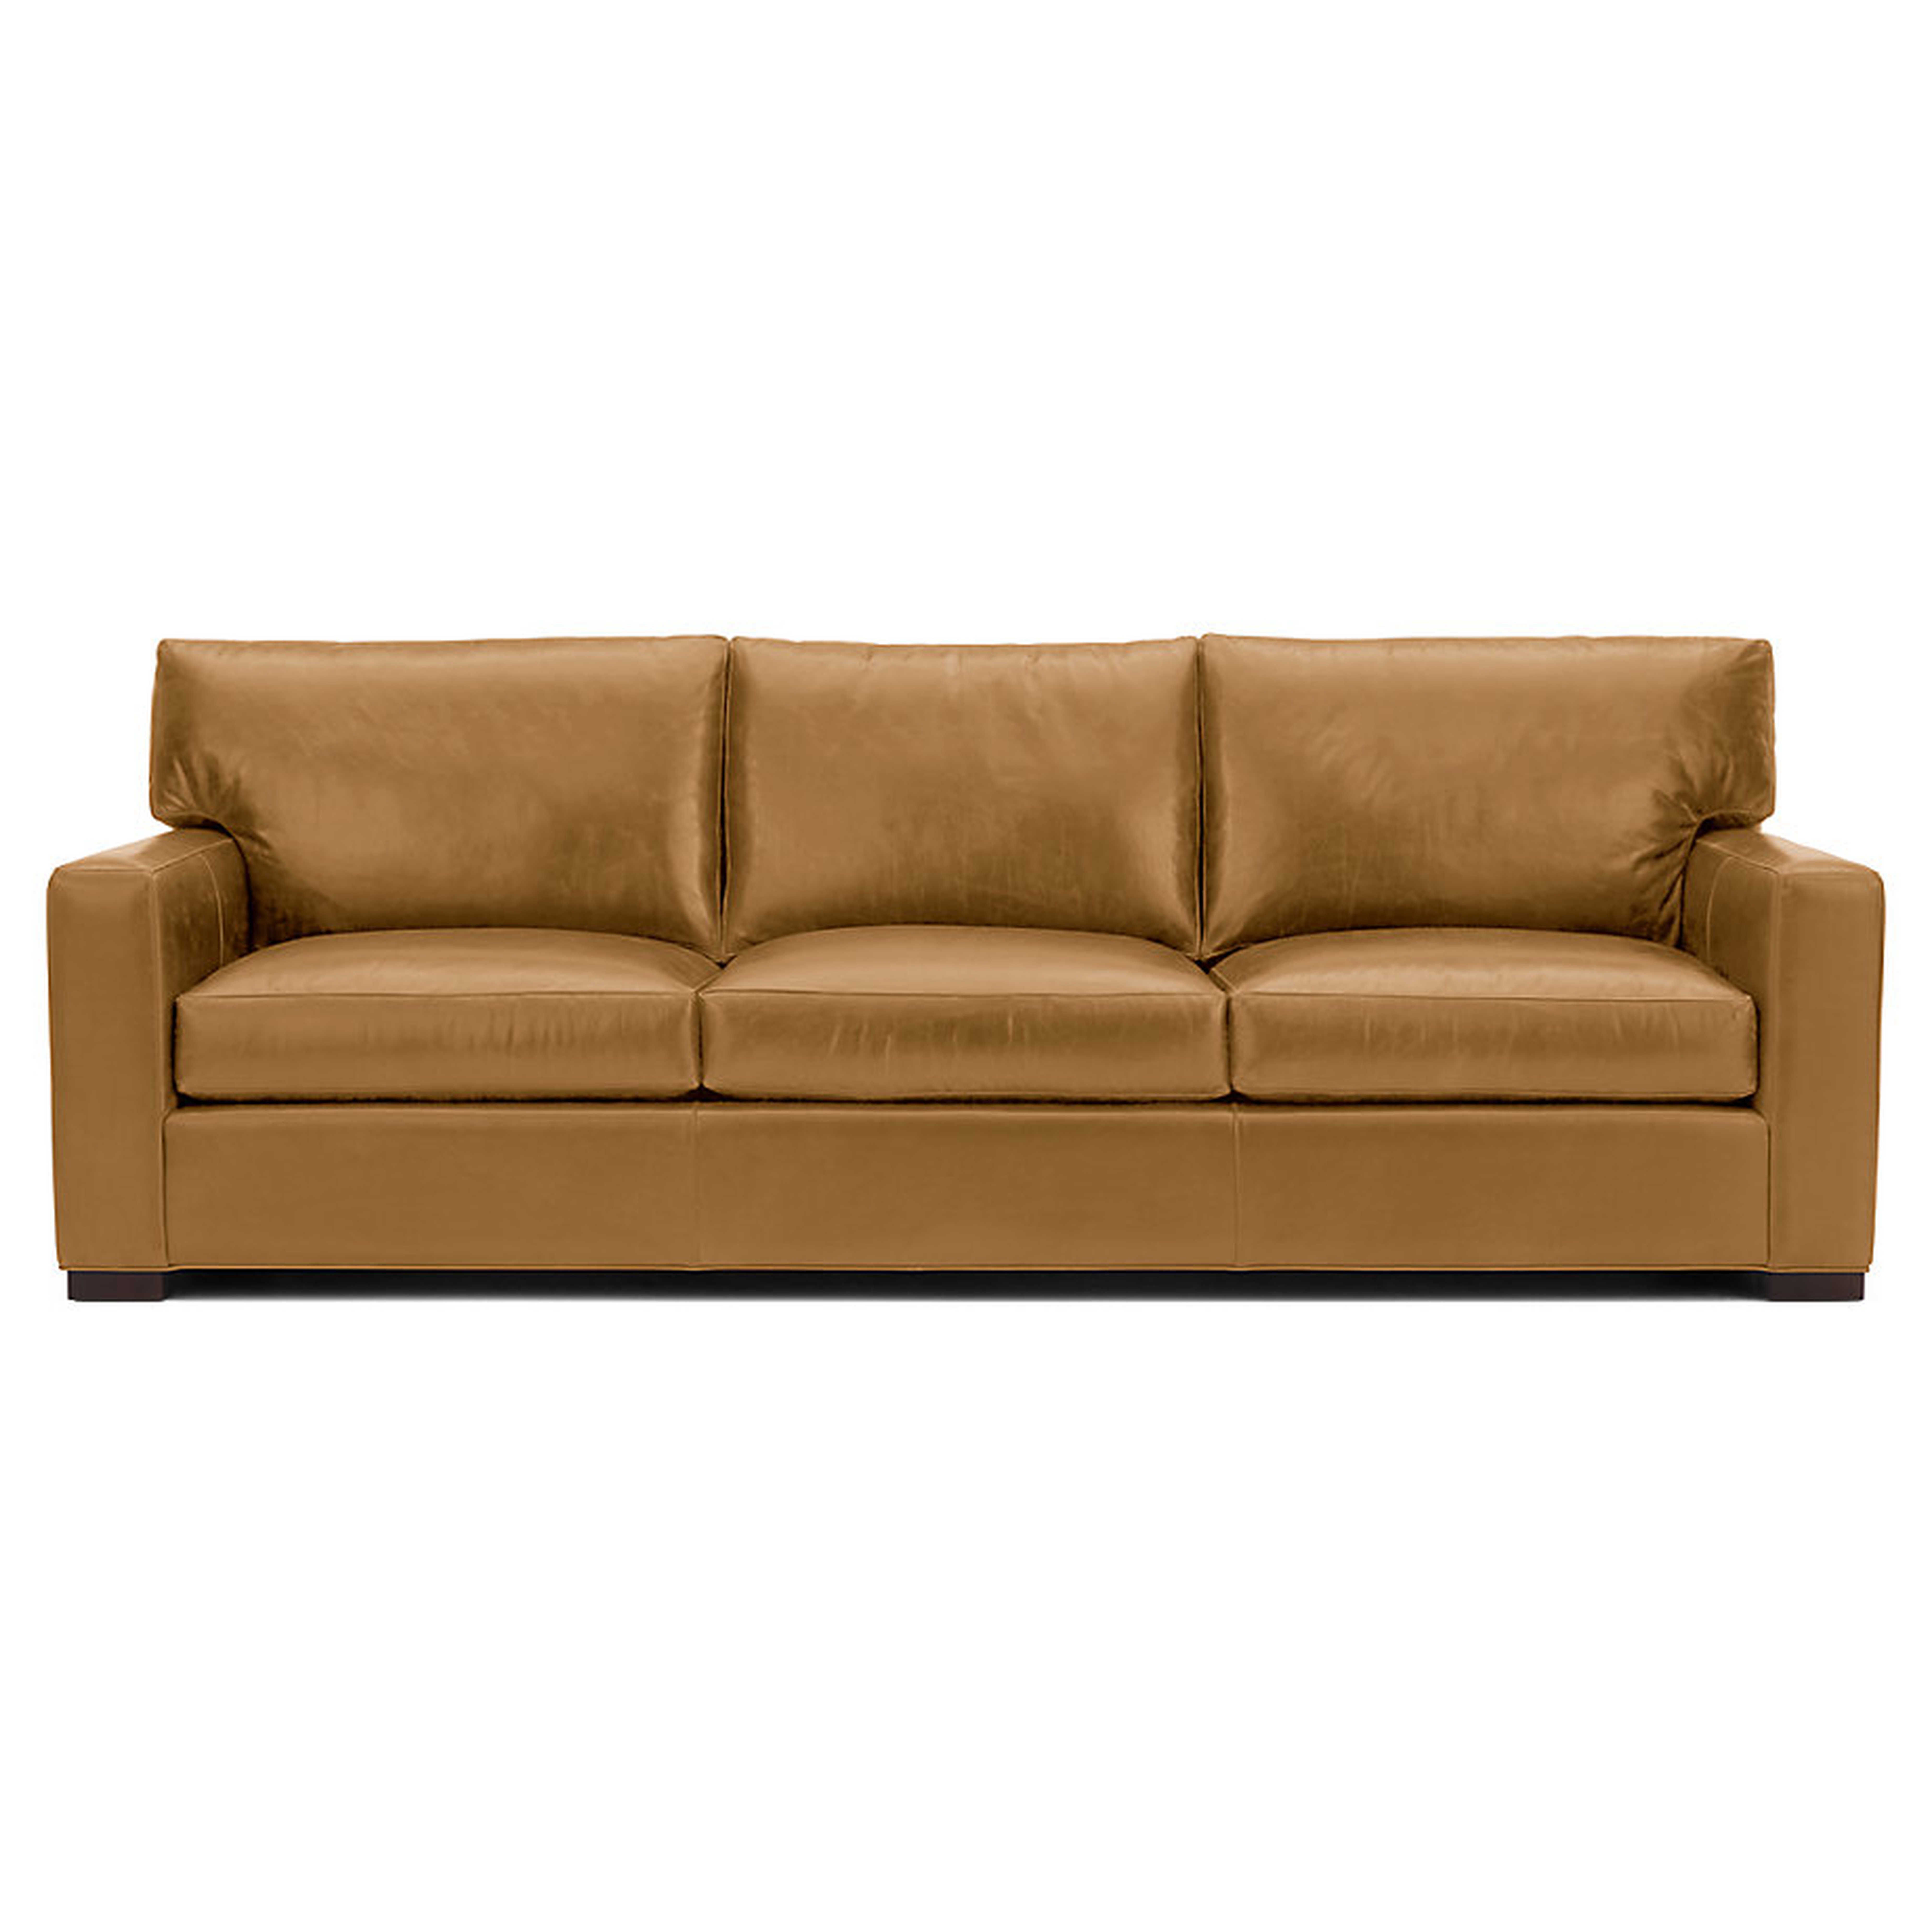 Axis II Leather 3-Seat 105" Grande Sofa-Libby Amaretto;Hickory - Crate and Barrel